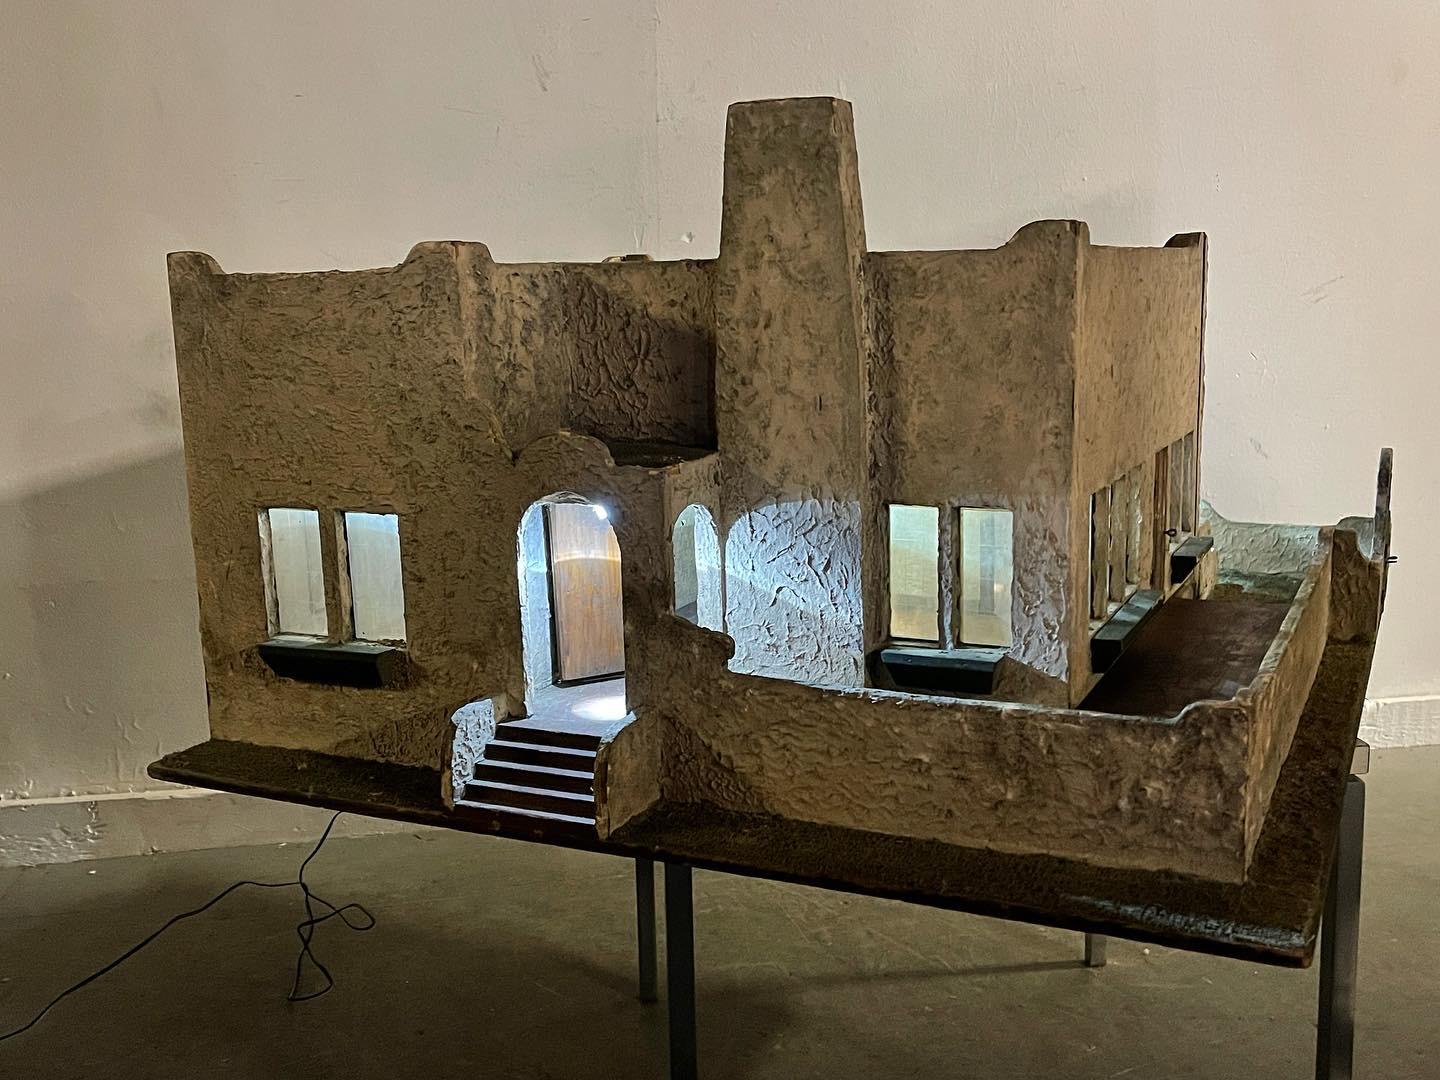 1930s Architectural Model, possibly a hand made doll house? Modernist Adobe Home. Amazing design, proportion. Color, patina, surface. Very detailed. Removable exterior walls, working light fixtures in each room as well as outdoor porch light.